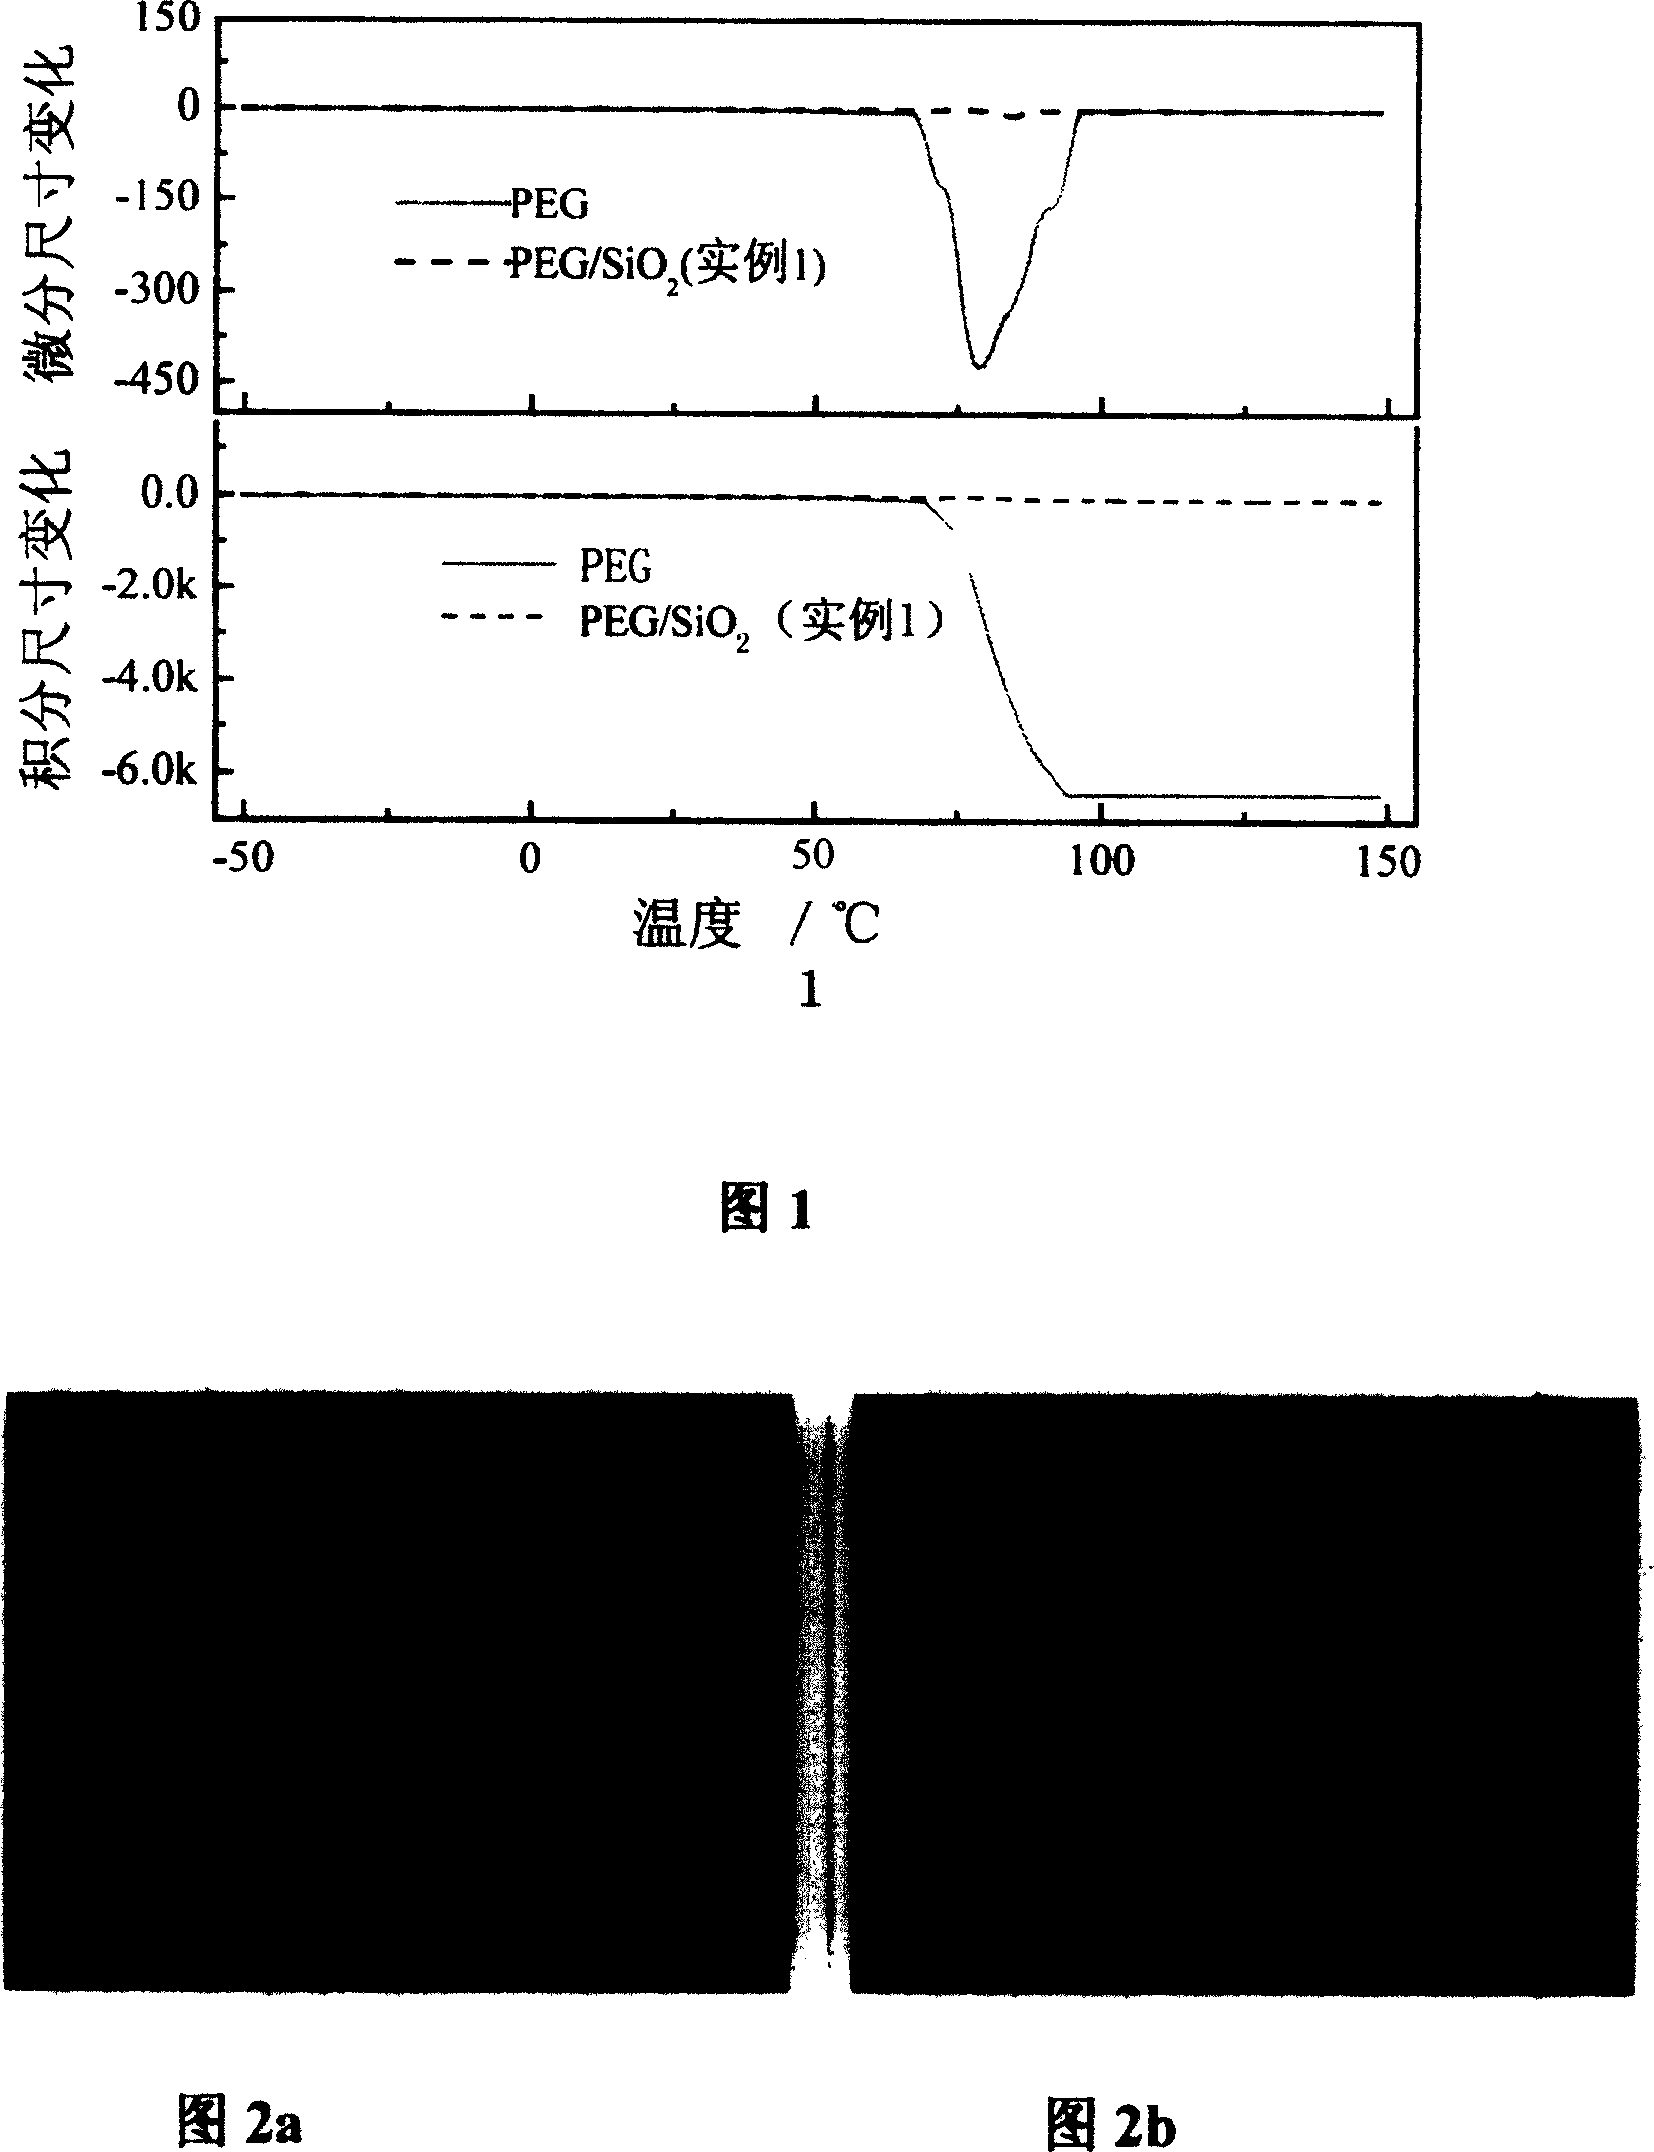 Process for preparing compound forming phase changing material of polyethyldiol/silicon dioxide